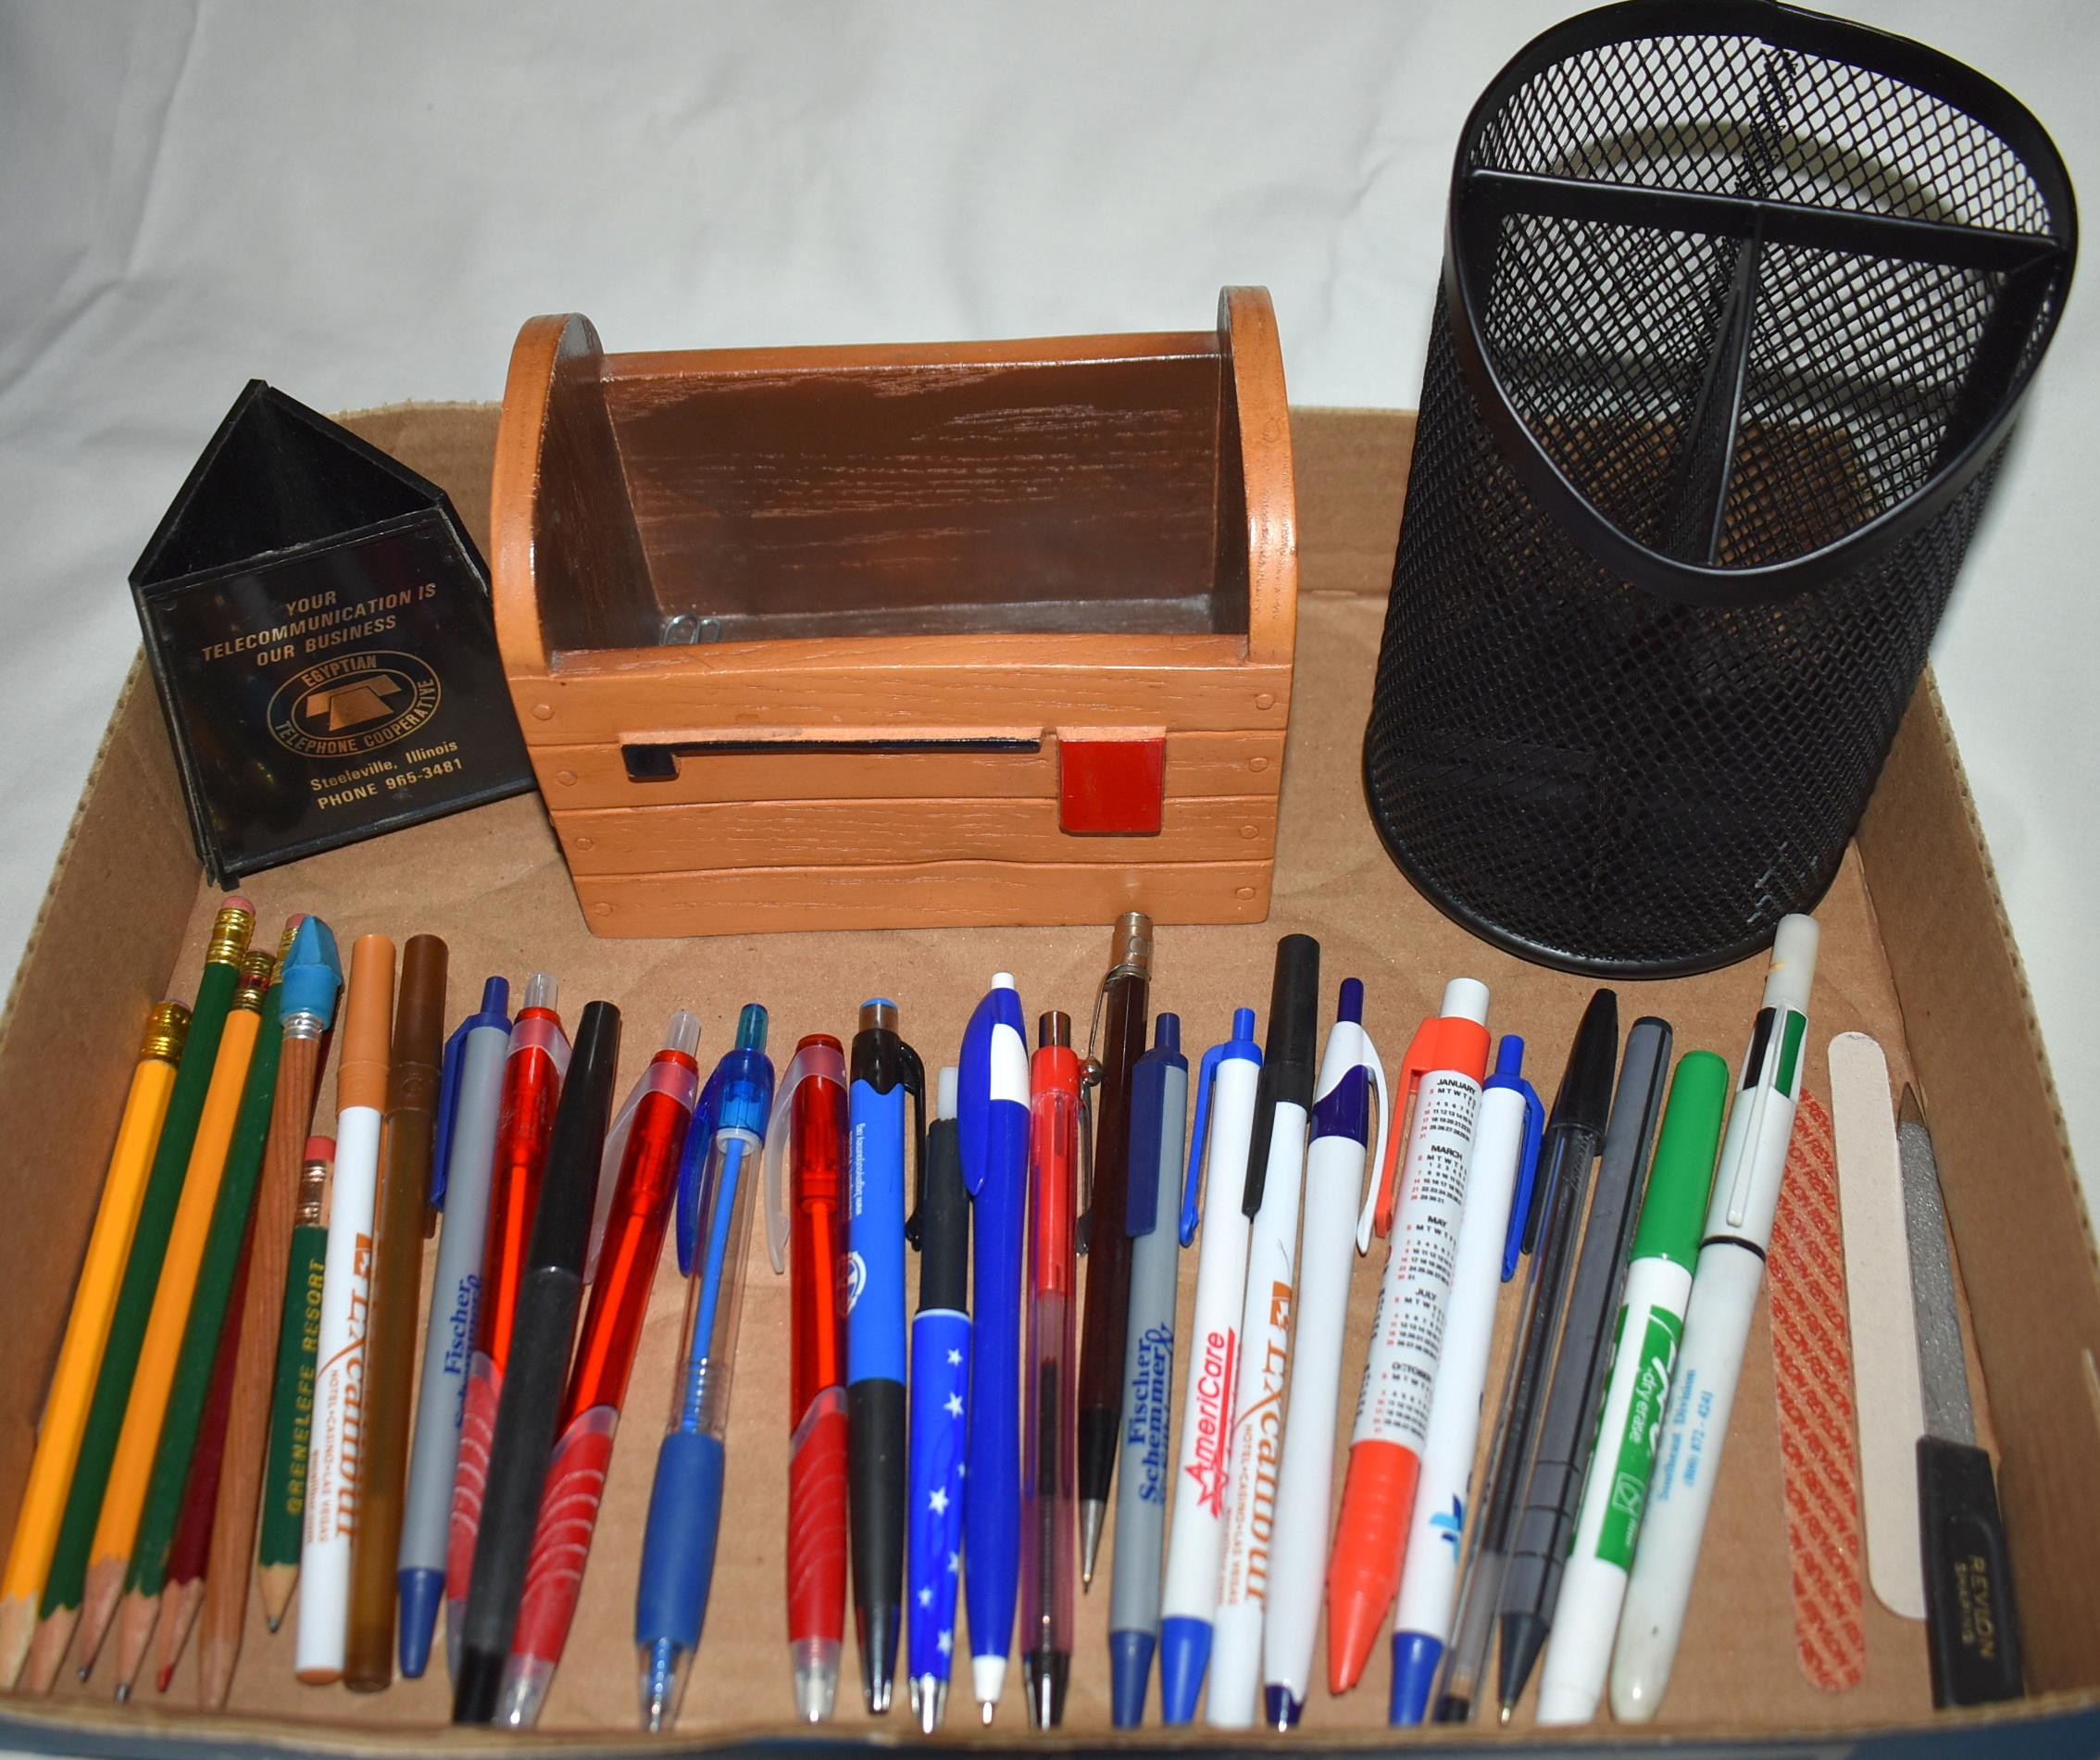 INK PEN SET IN DELUXE WOODEN CASE, INK PENS, DESK CADDY, AND MORE,